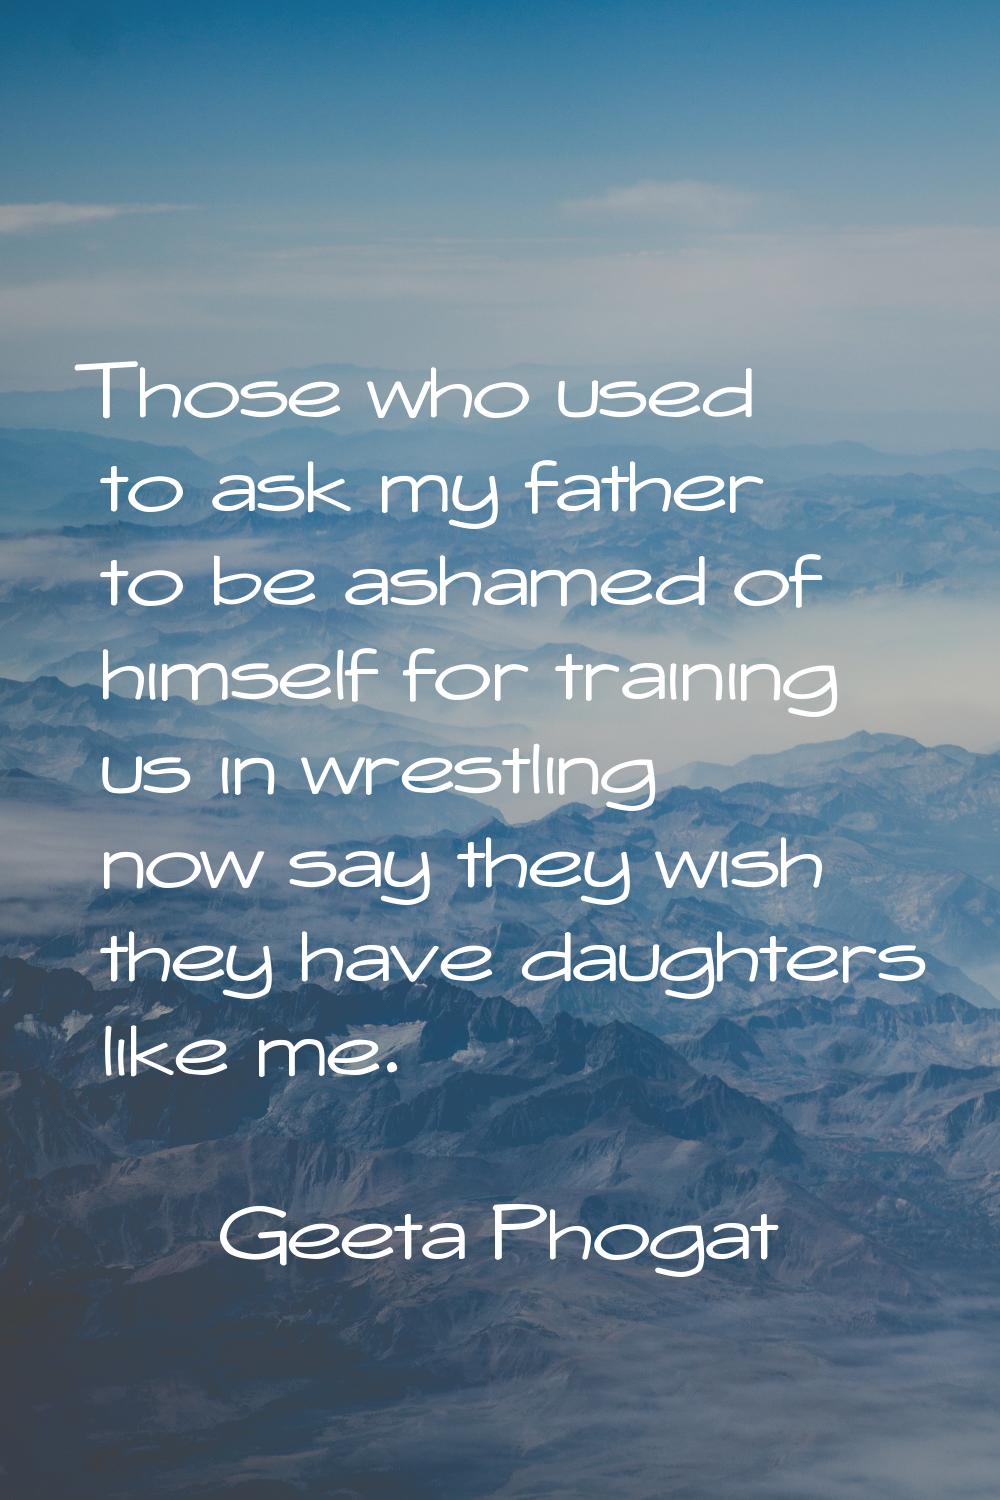 Those who used to ask my father to be ashamed of himself for training us in wrestling now say they 